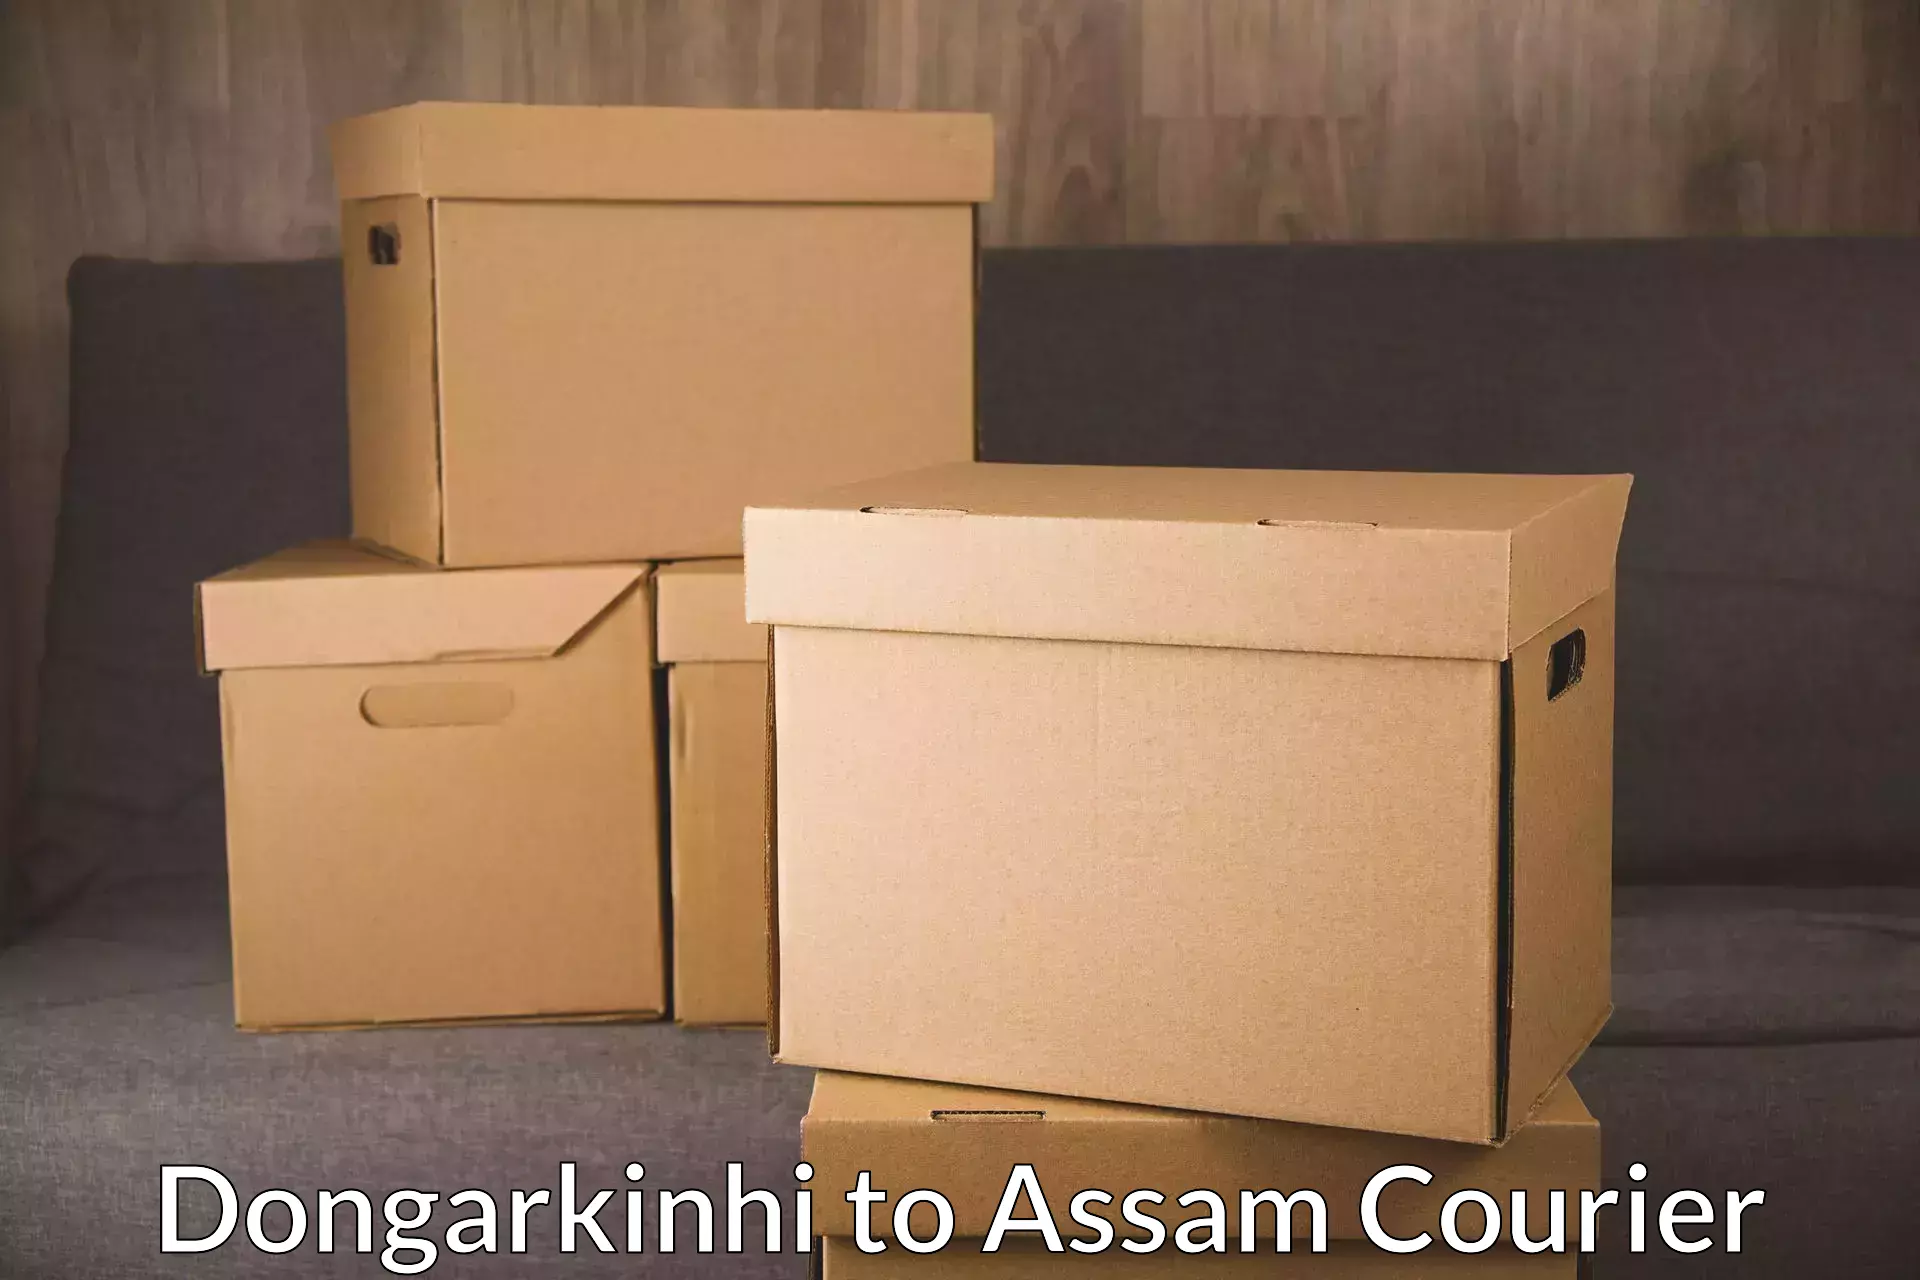 24/7 courier service Dongarkinhi to Khetri